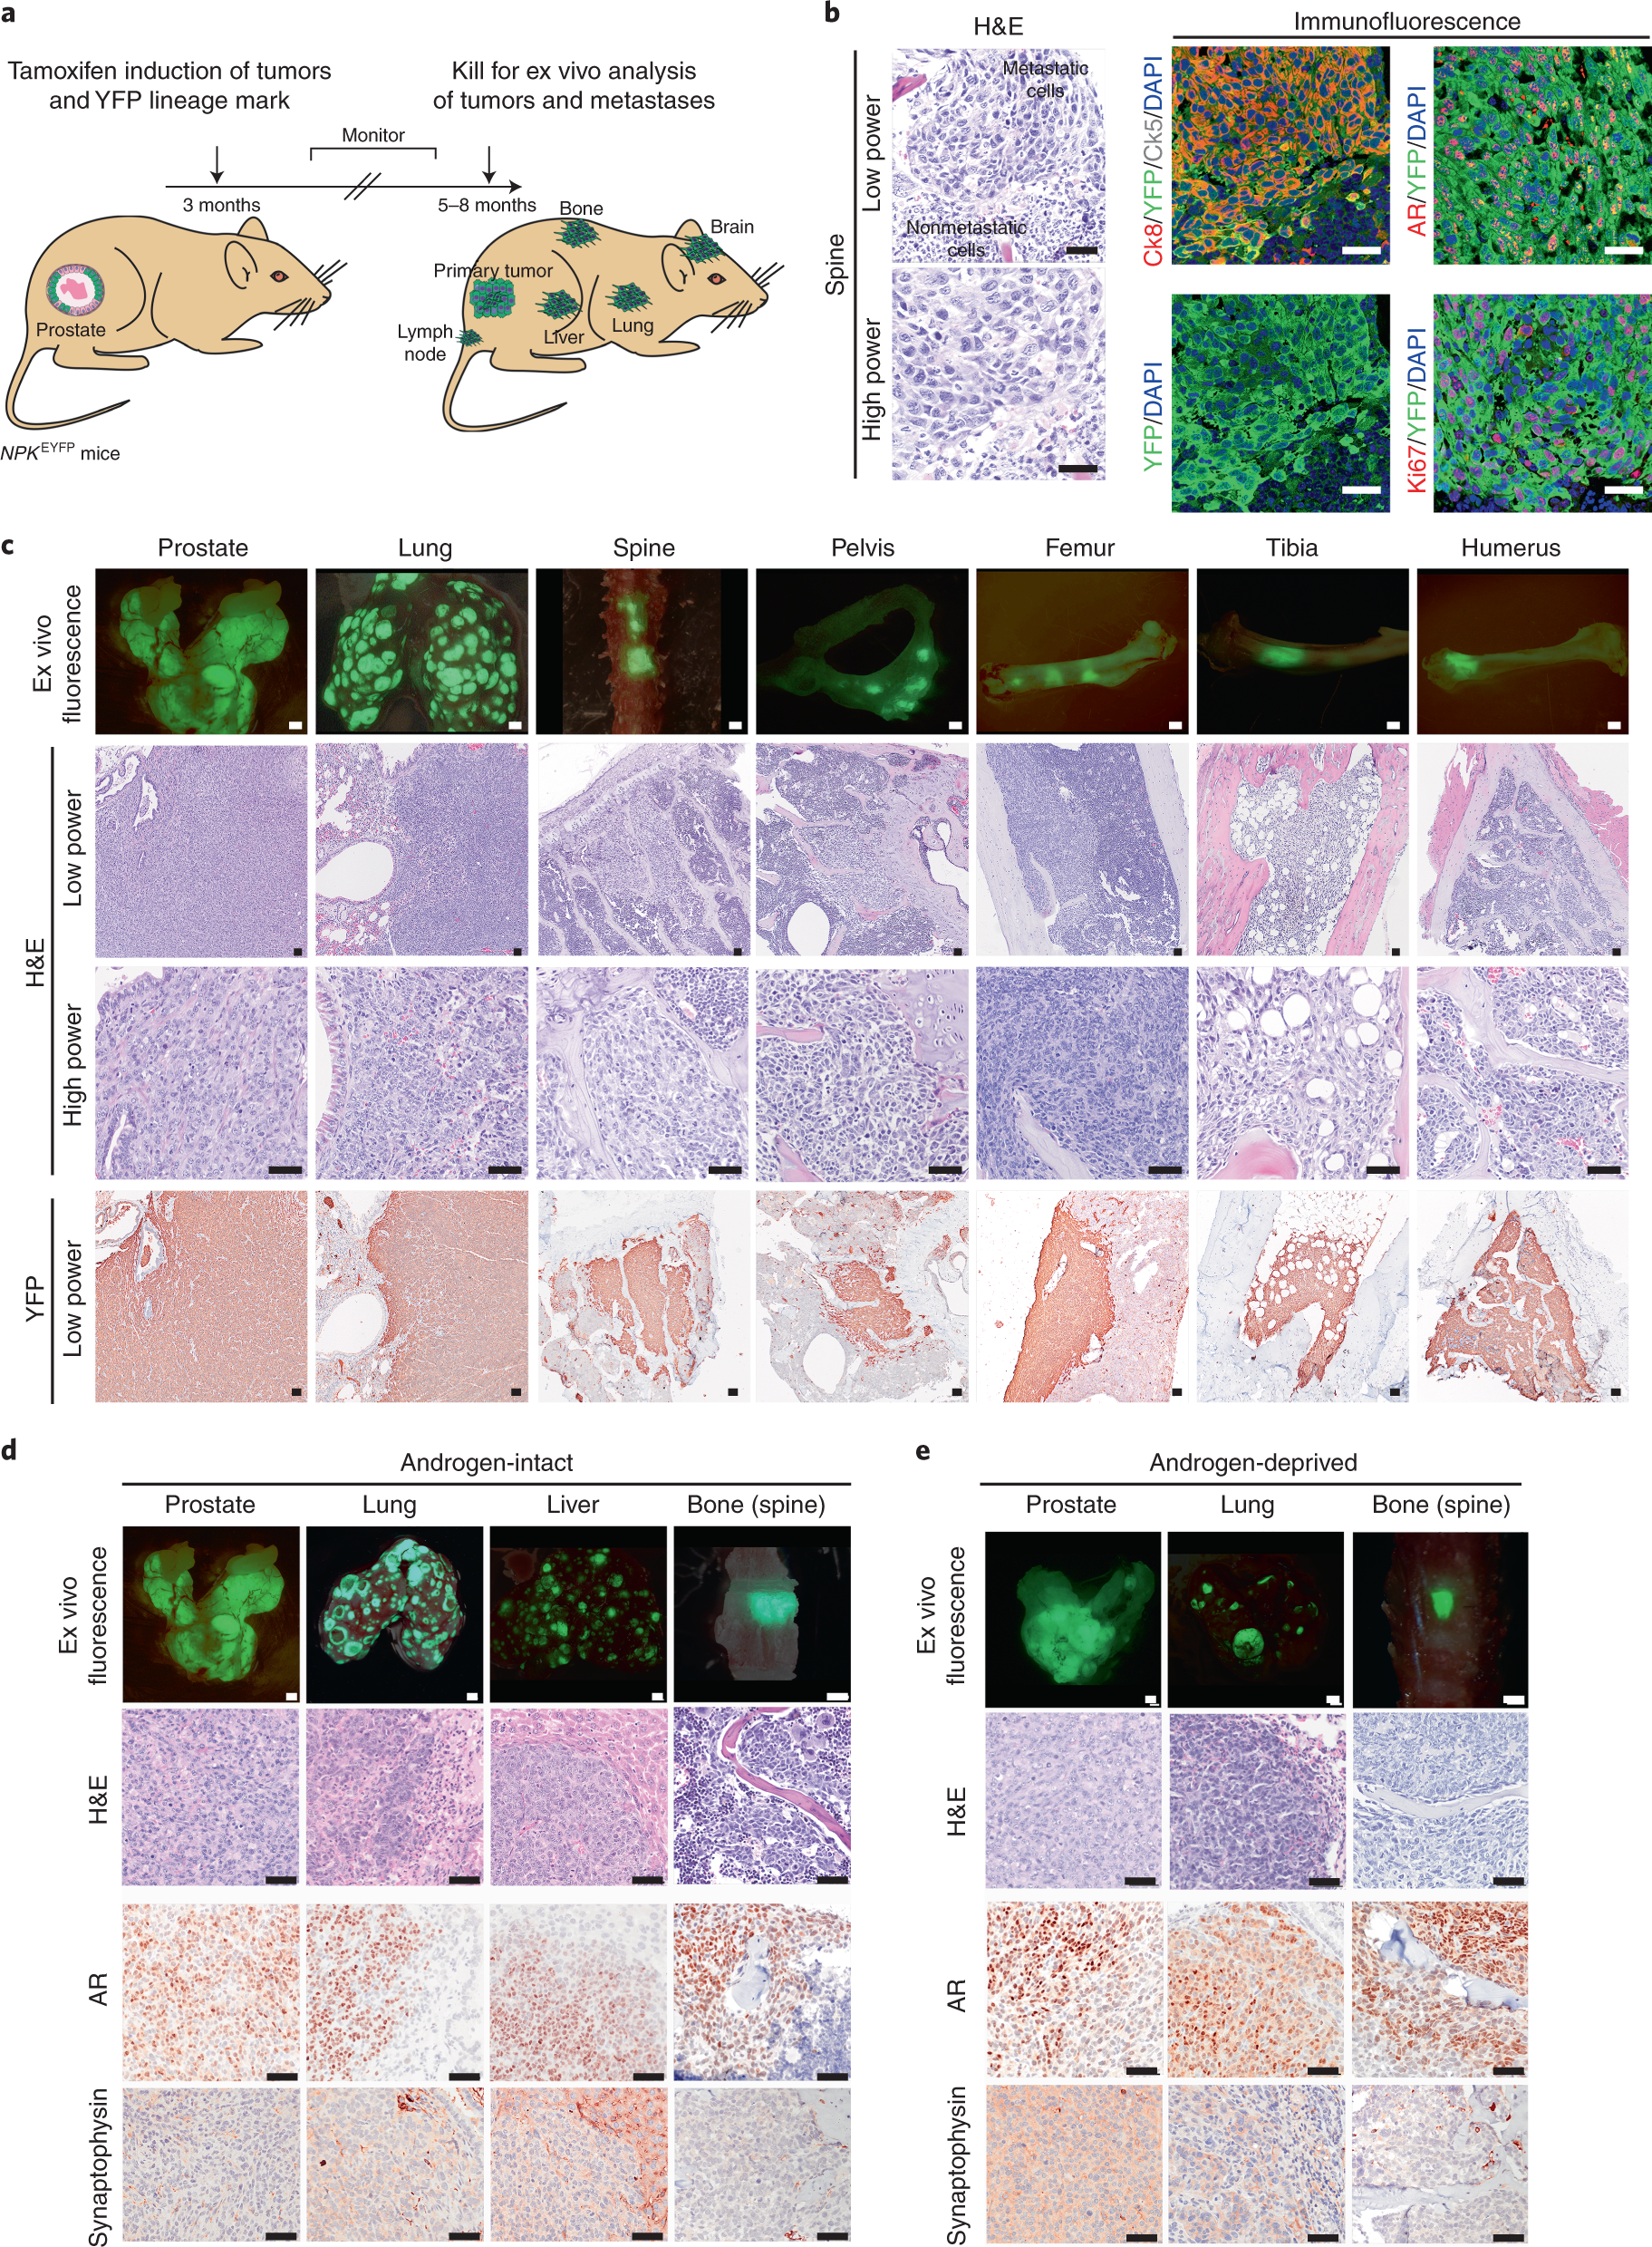 A Myc And Ras Co Activation Signature In Localized Prostate Cancer Drives Bone Metastasis And Castration Resistance Nature Cancer